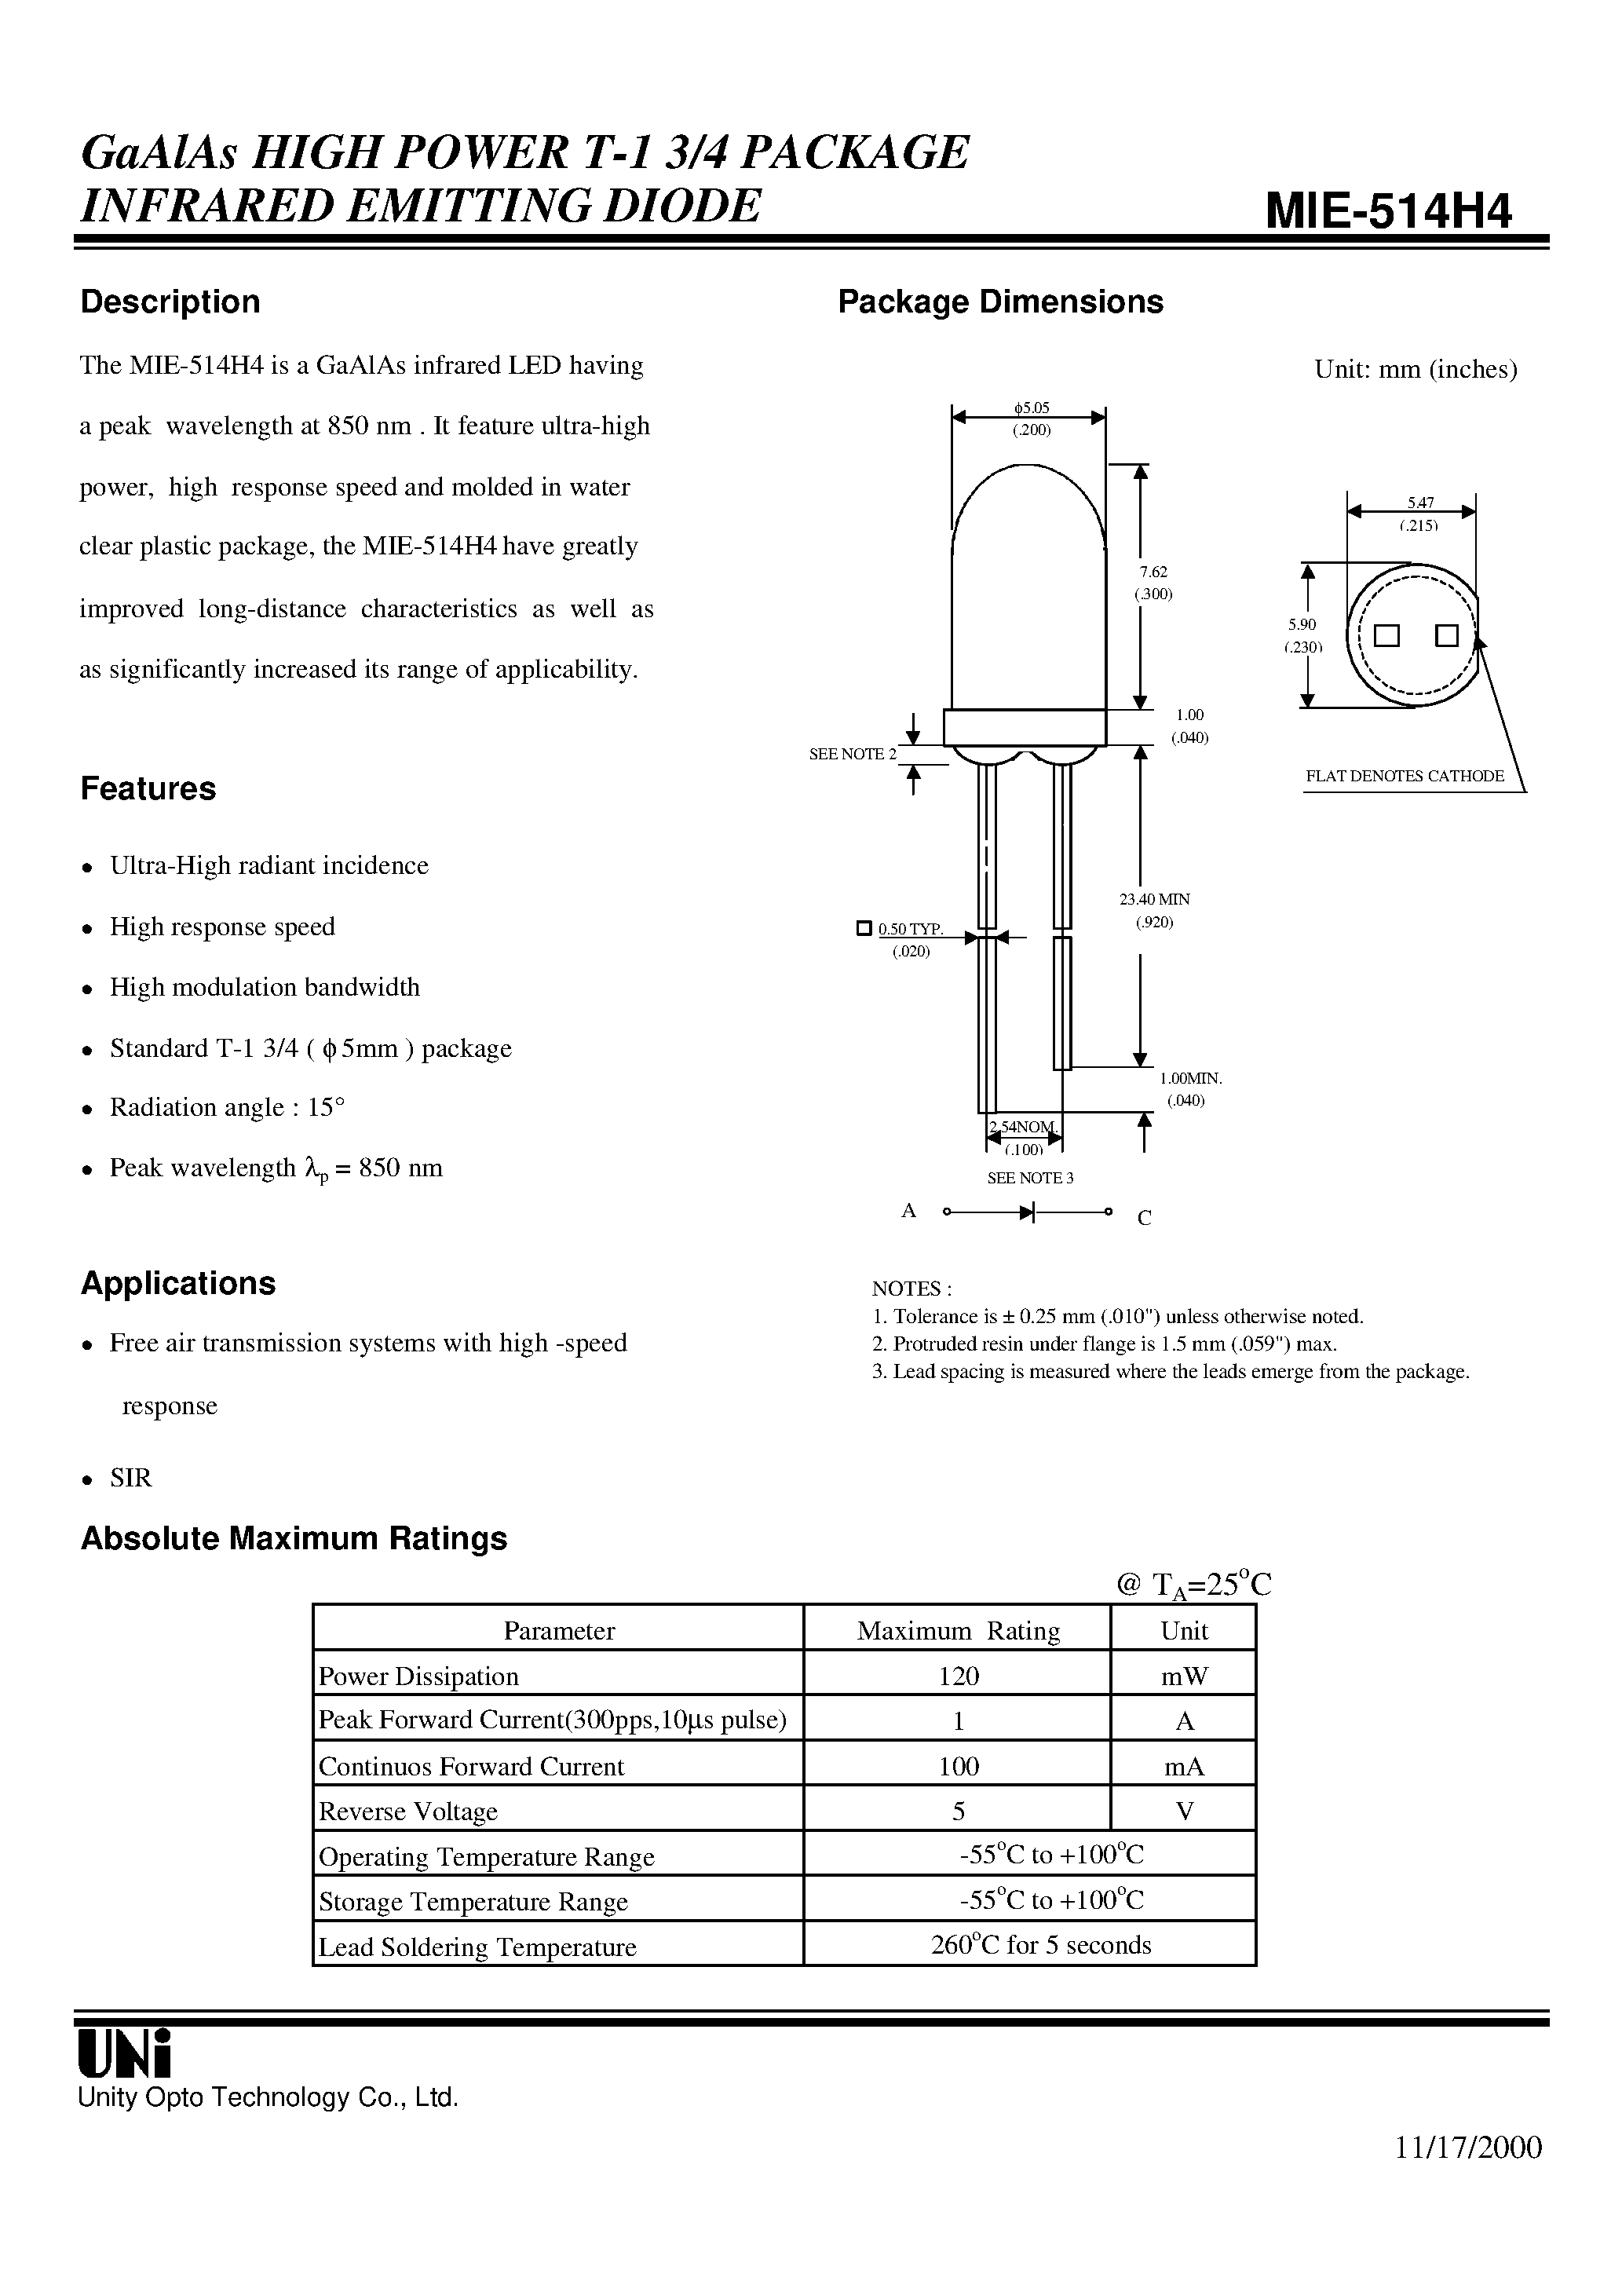 Datasheet MIE-514H4 - GaAlAs HIGH POWER T-1 3/4 PACKAGE INFRARED EMITTING DIODE page 1